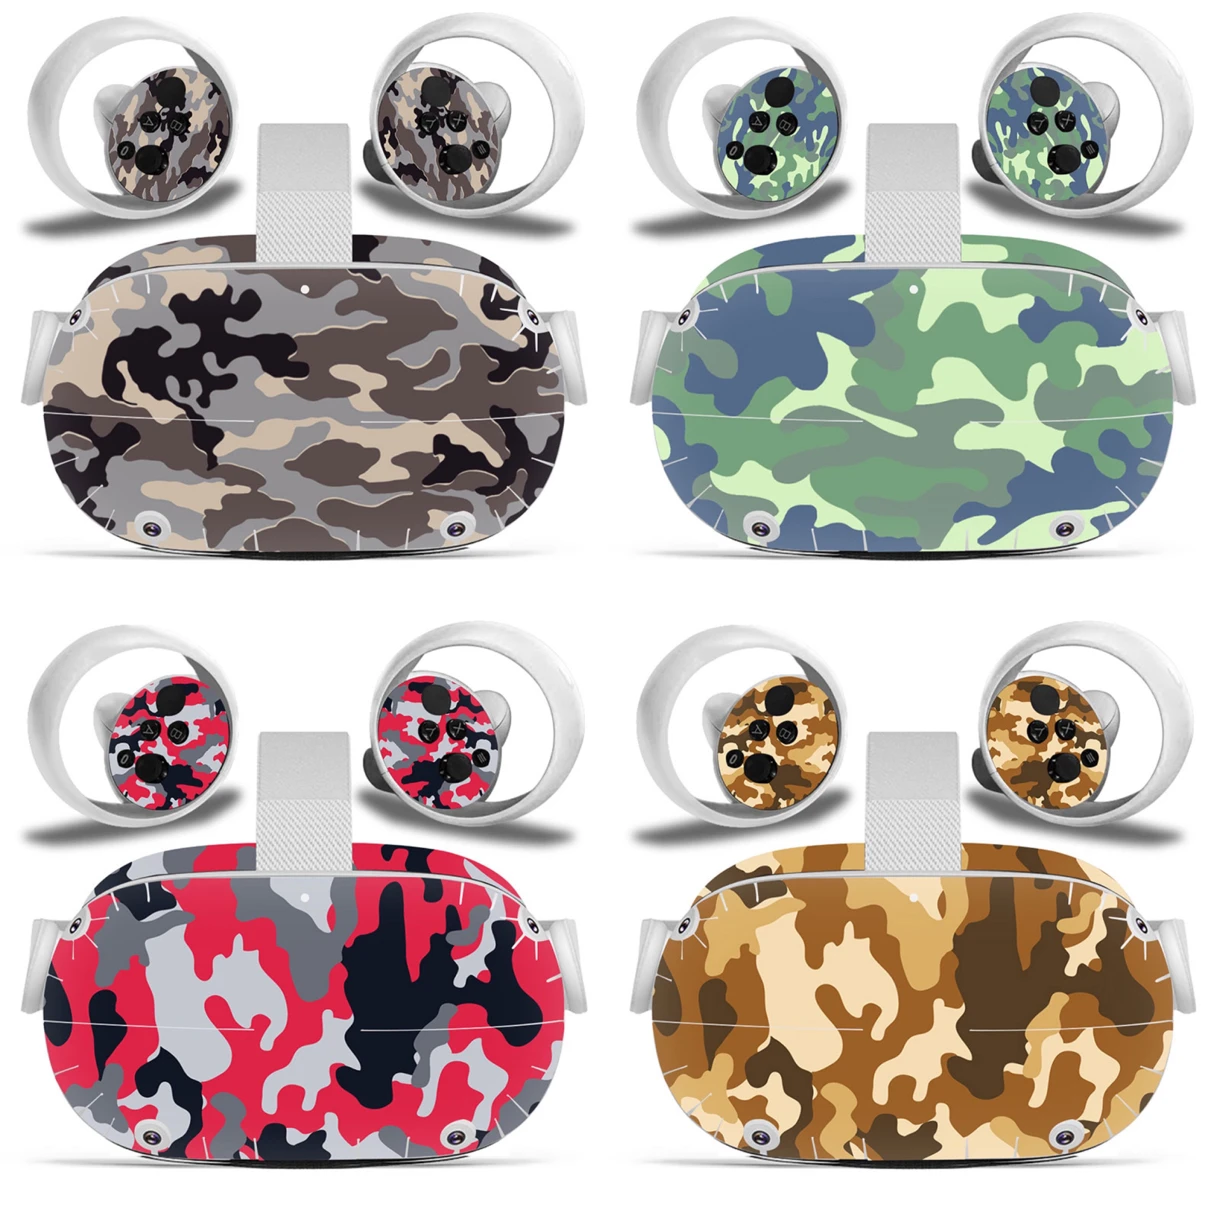 Camouflage design for Oculus Quest 2 VR Sticker Headset Virtual Reality Decals Protective PVC Skin for Oculus Quest 2 VR sticker - ANKUX Tech Co., Ltd